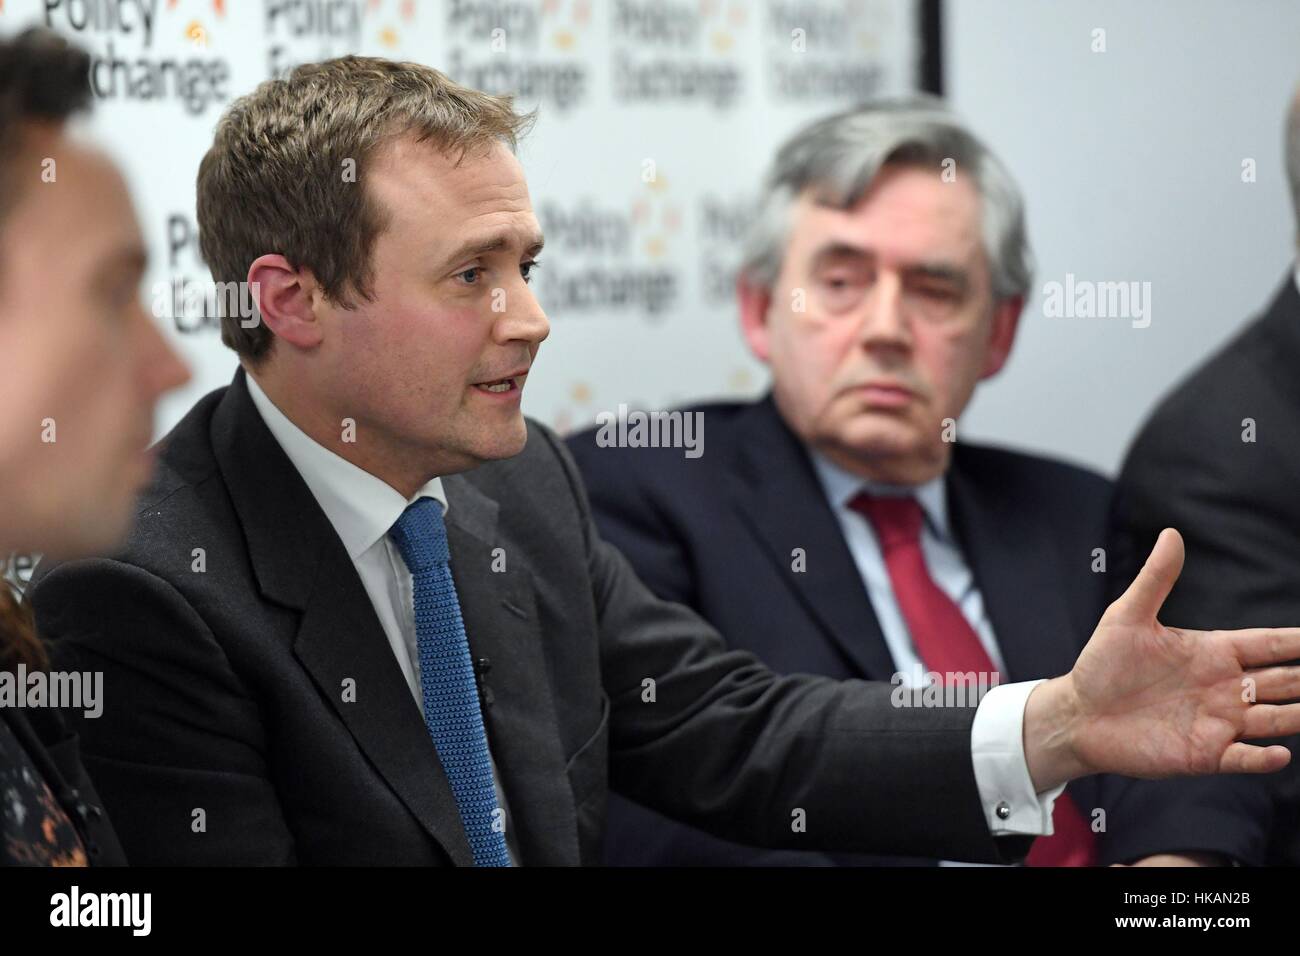 Tom Tugendhat MP is watched by former Prime Minister Gordon Brown (right) at the launch of a new bipartisan report titled The Cost of Doing Nothing, co-authored by the late Jo Cox MP, at the Policy Exchange in Westminster, London. Stock Photo